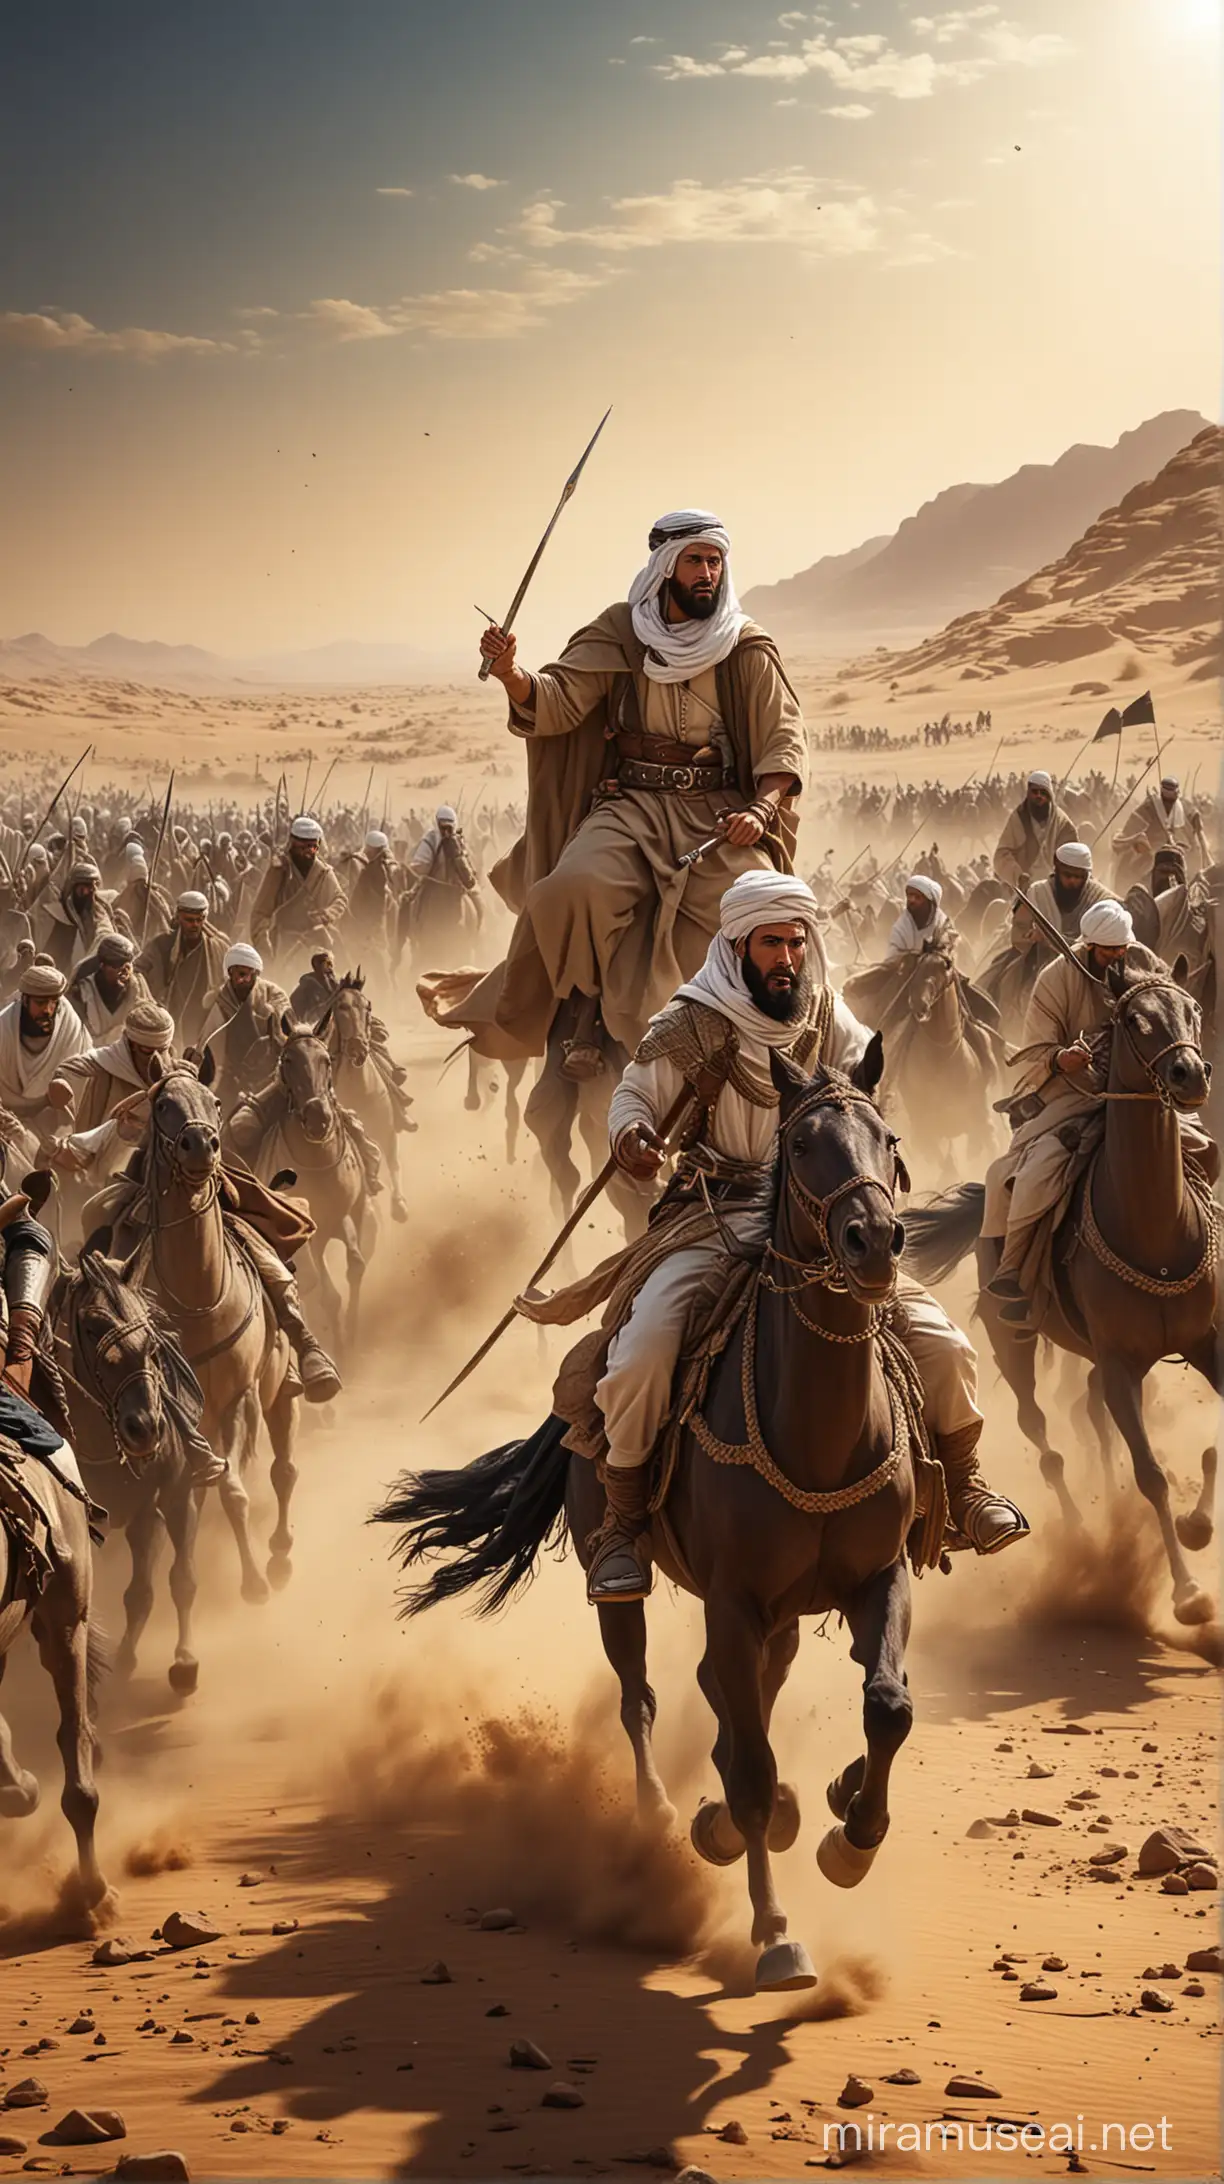 Create an illustration depicting the intense moment of the Battle of Badr, with Prophet Muhammad (peace be upon him) leading his companions into battle against the Quraysh tribe.
with isalmic tradition , HD nad 4K